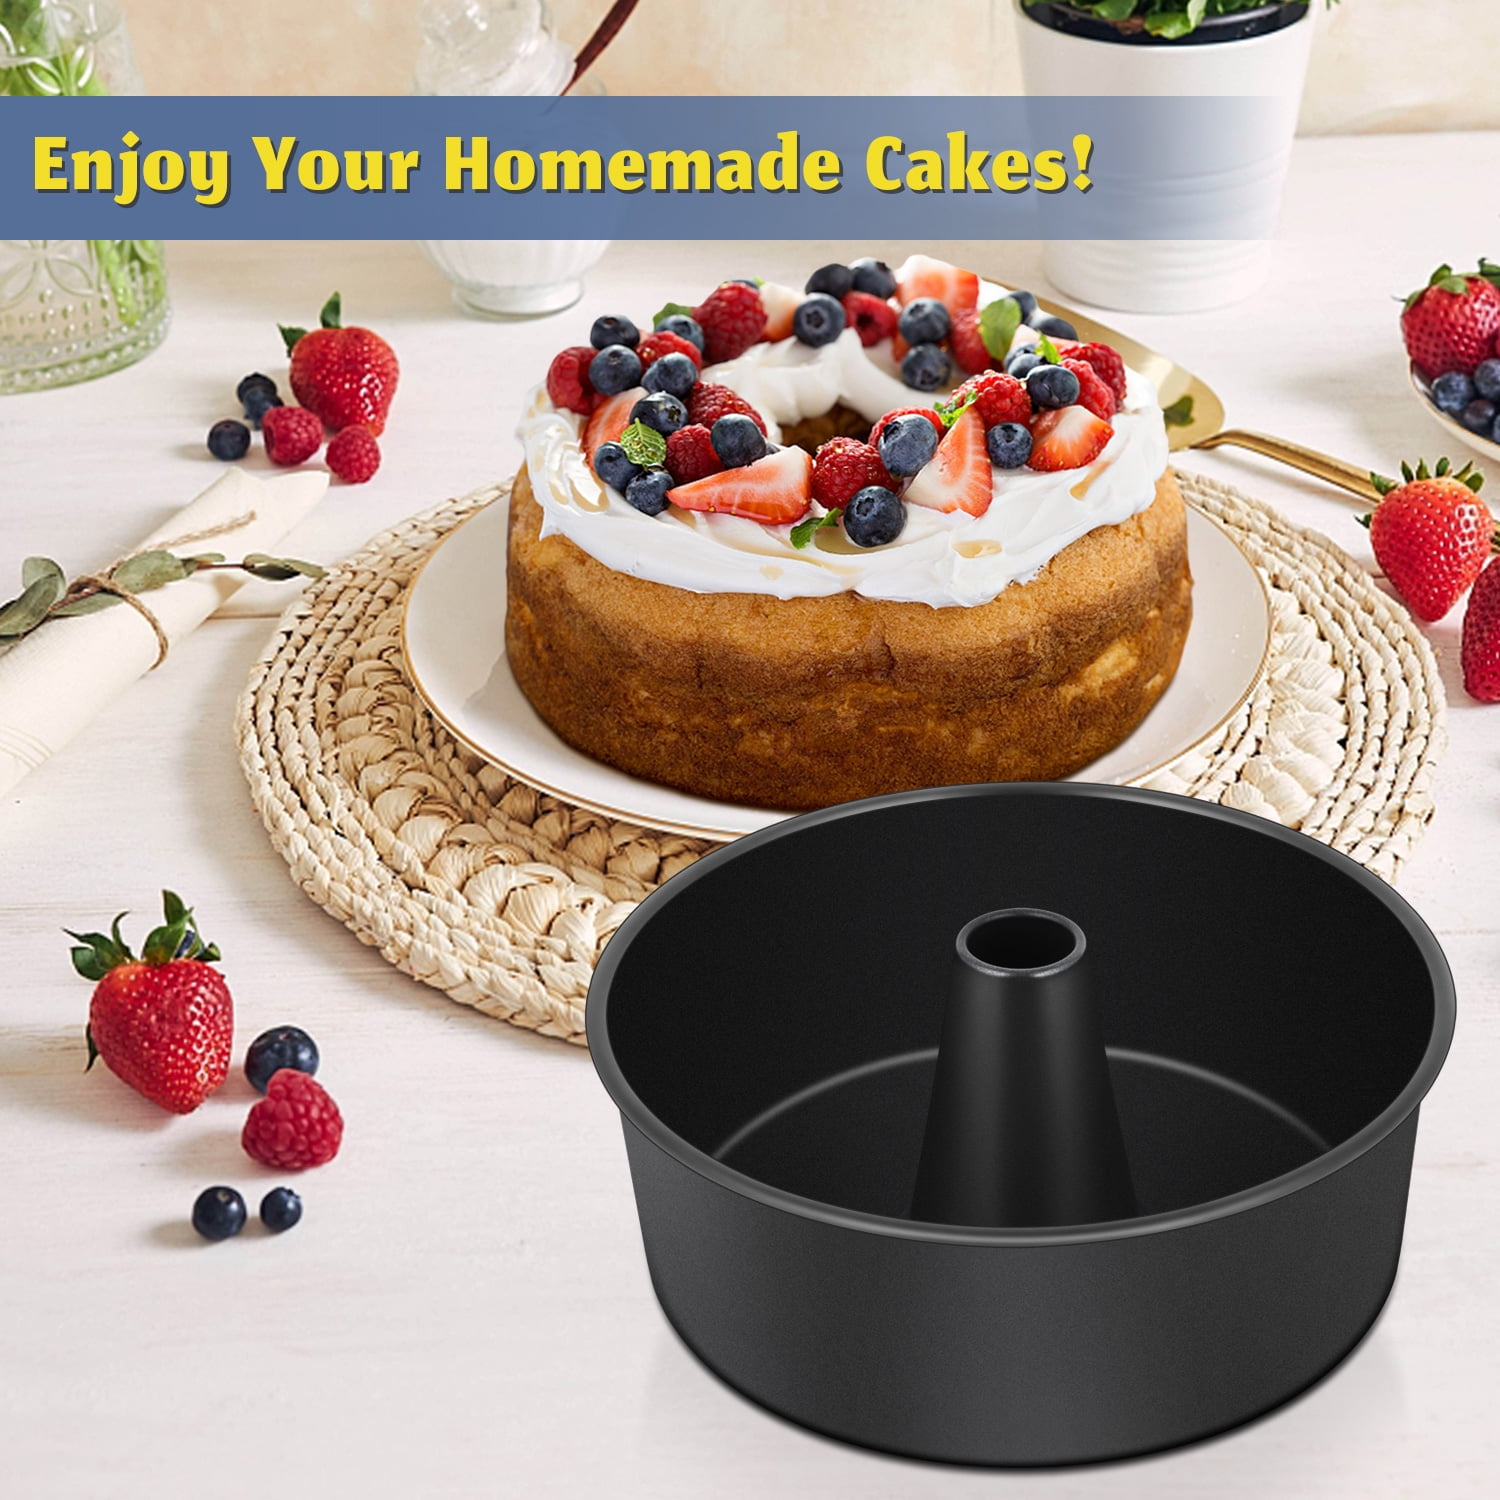 10inch Angel Food Cake Pan, Stainless Steel Pound Cake Pan Mold With Tube,  Hollow For Home/kitchen Baking, Healthy & Non-toxic, Durable & One-piece, M